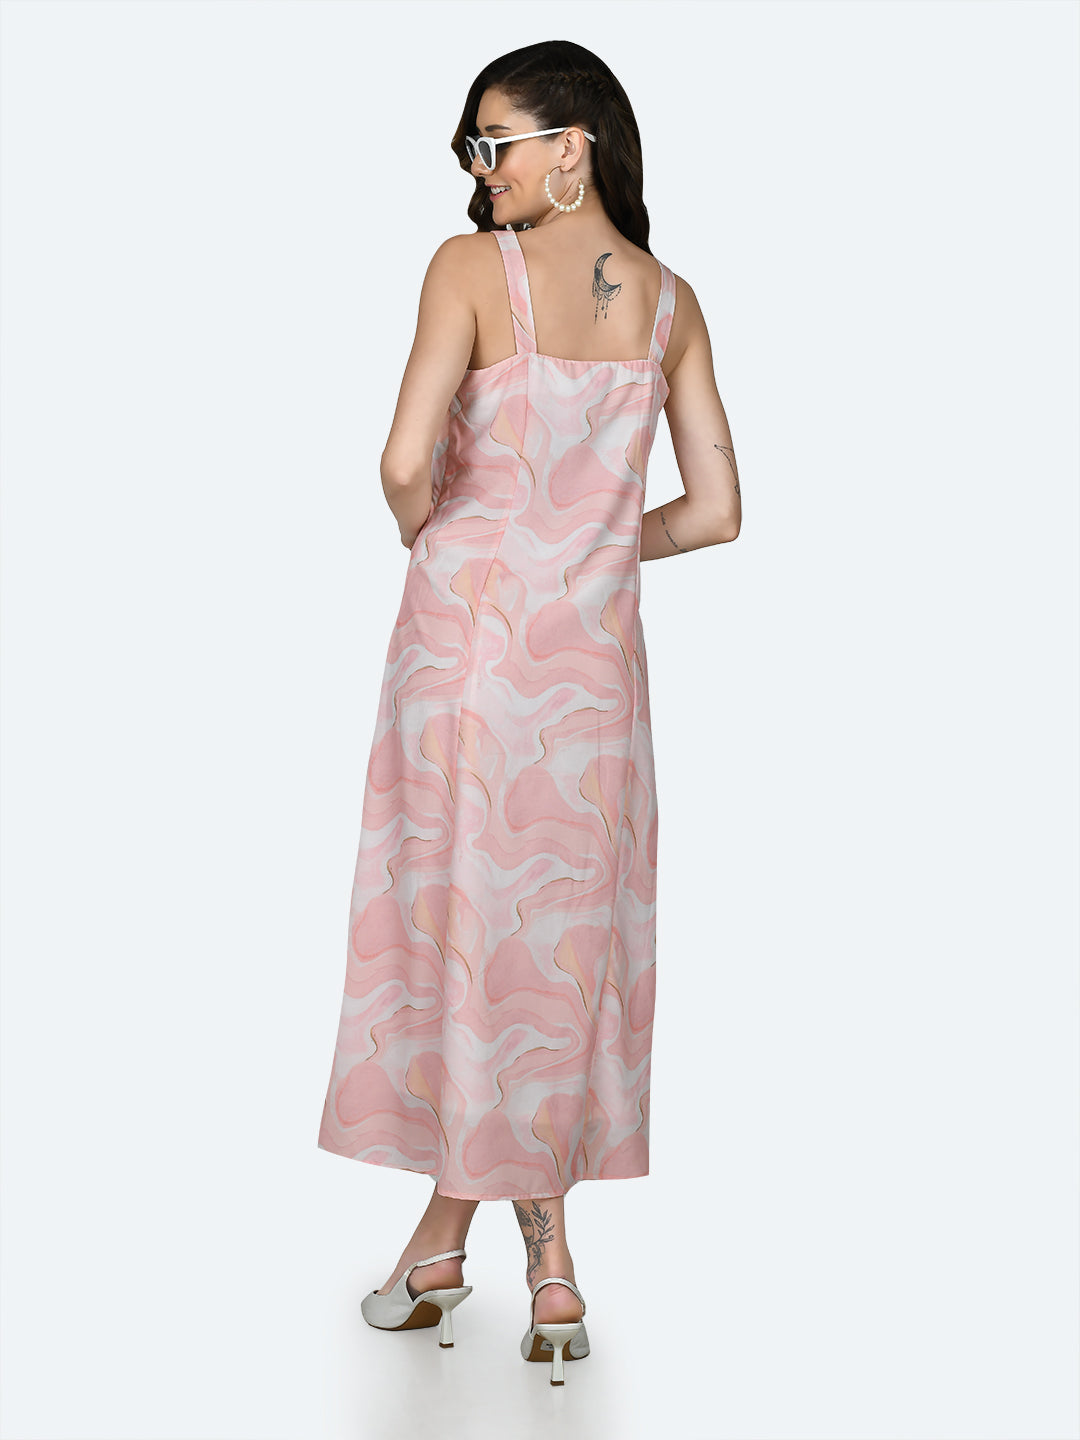 Peach Printed Strappy Maxi Dress For Women